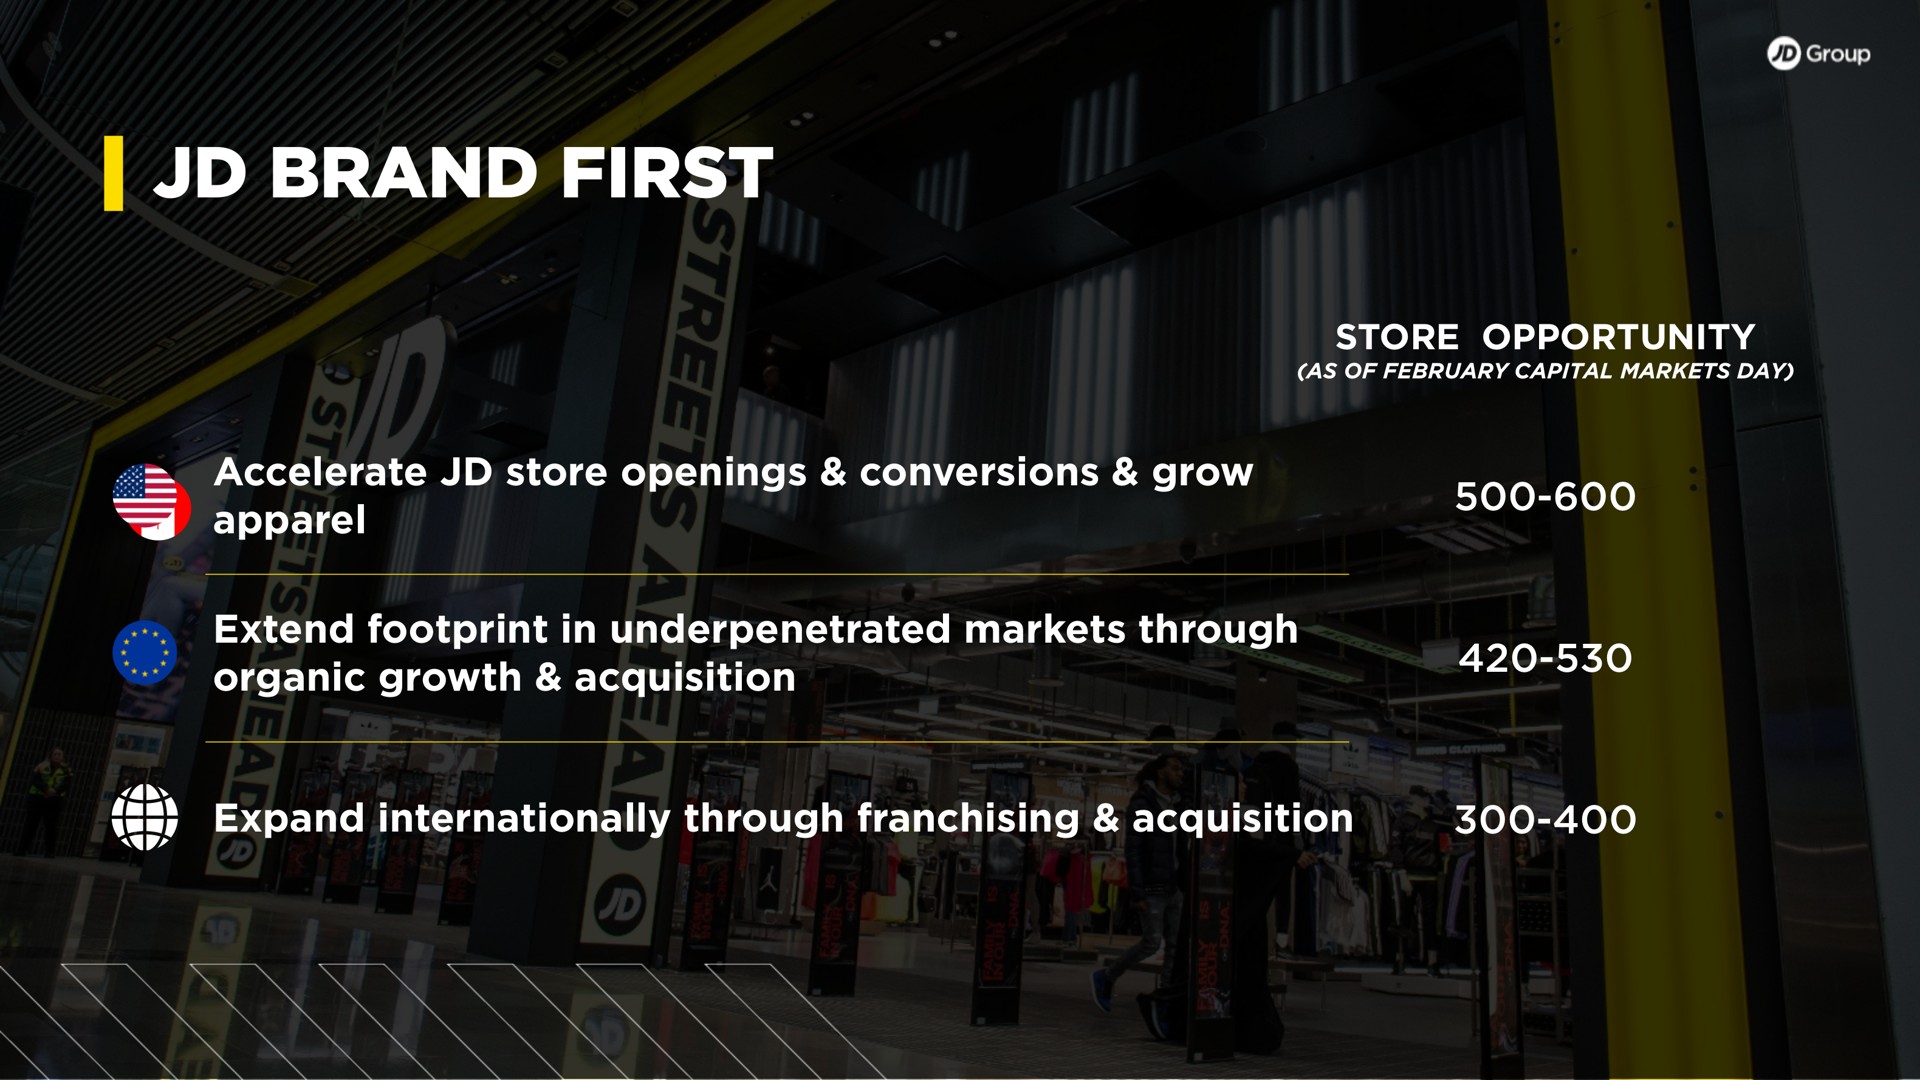 brand first accelerate store openings conversions grow apparel extend footprint in markets through organic growth acquisition expand internationally through franchising acquisition a opportunity | JD Sports